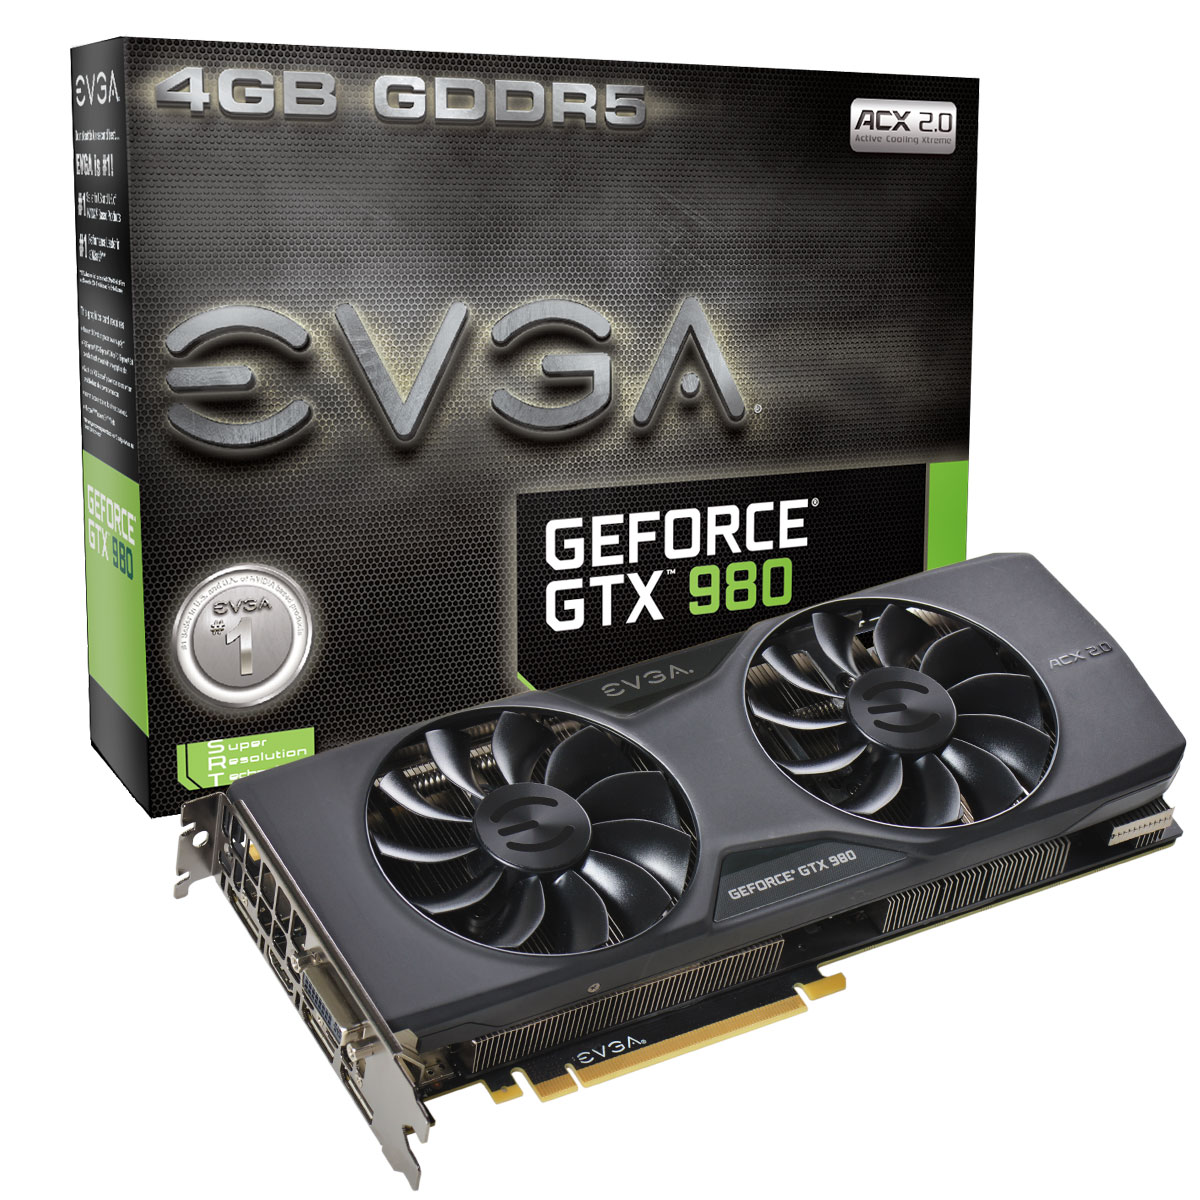 Nvidia's Board Partners: GTX 980 And 970 Card Roundup | Tom's Hardware